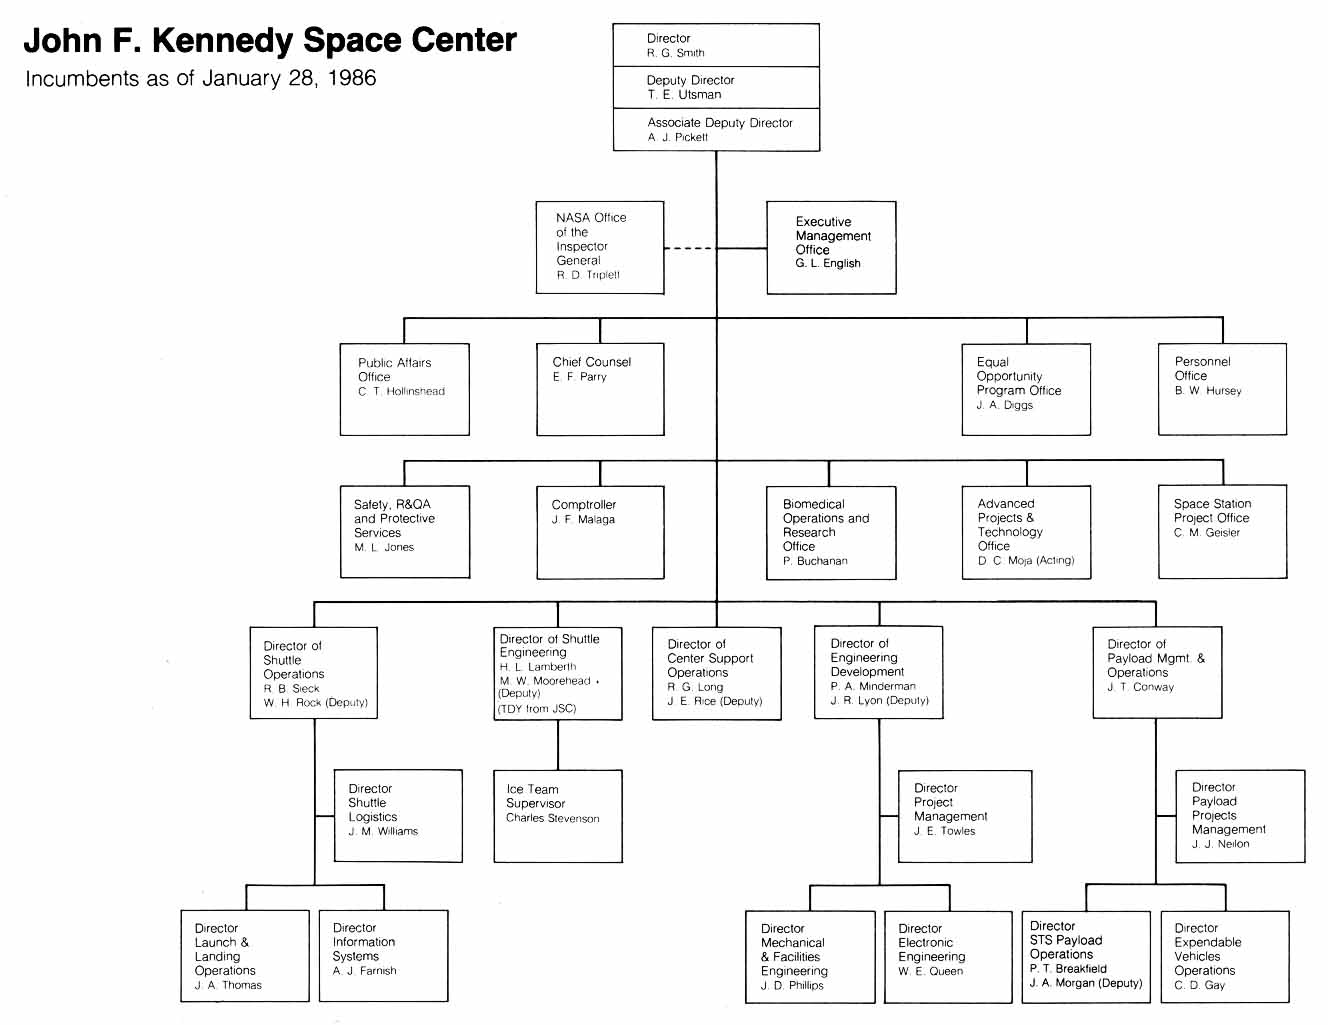 Relevant Organization Charts of NASA and Morton Thiokol. John F. Kennedy Space Center (incumbents as of January 28, 1986).